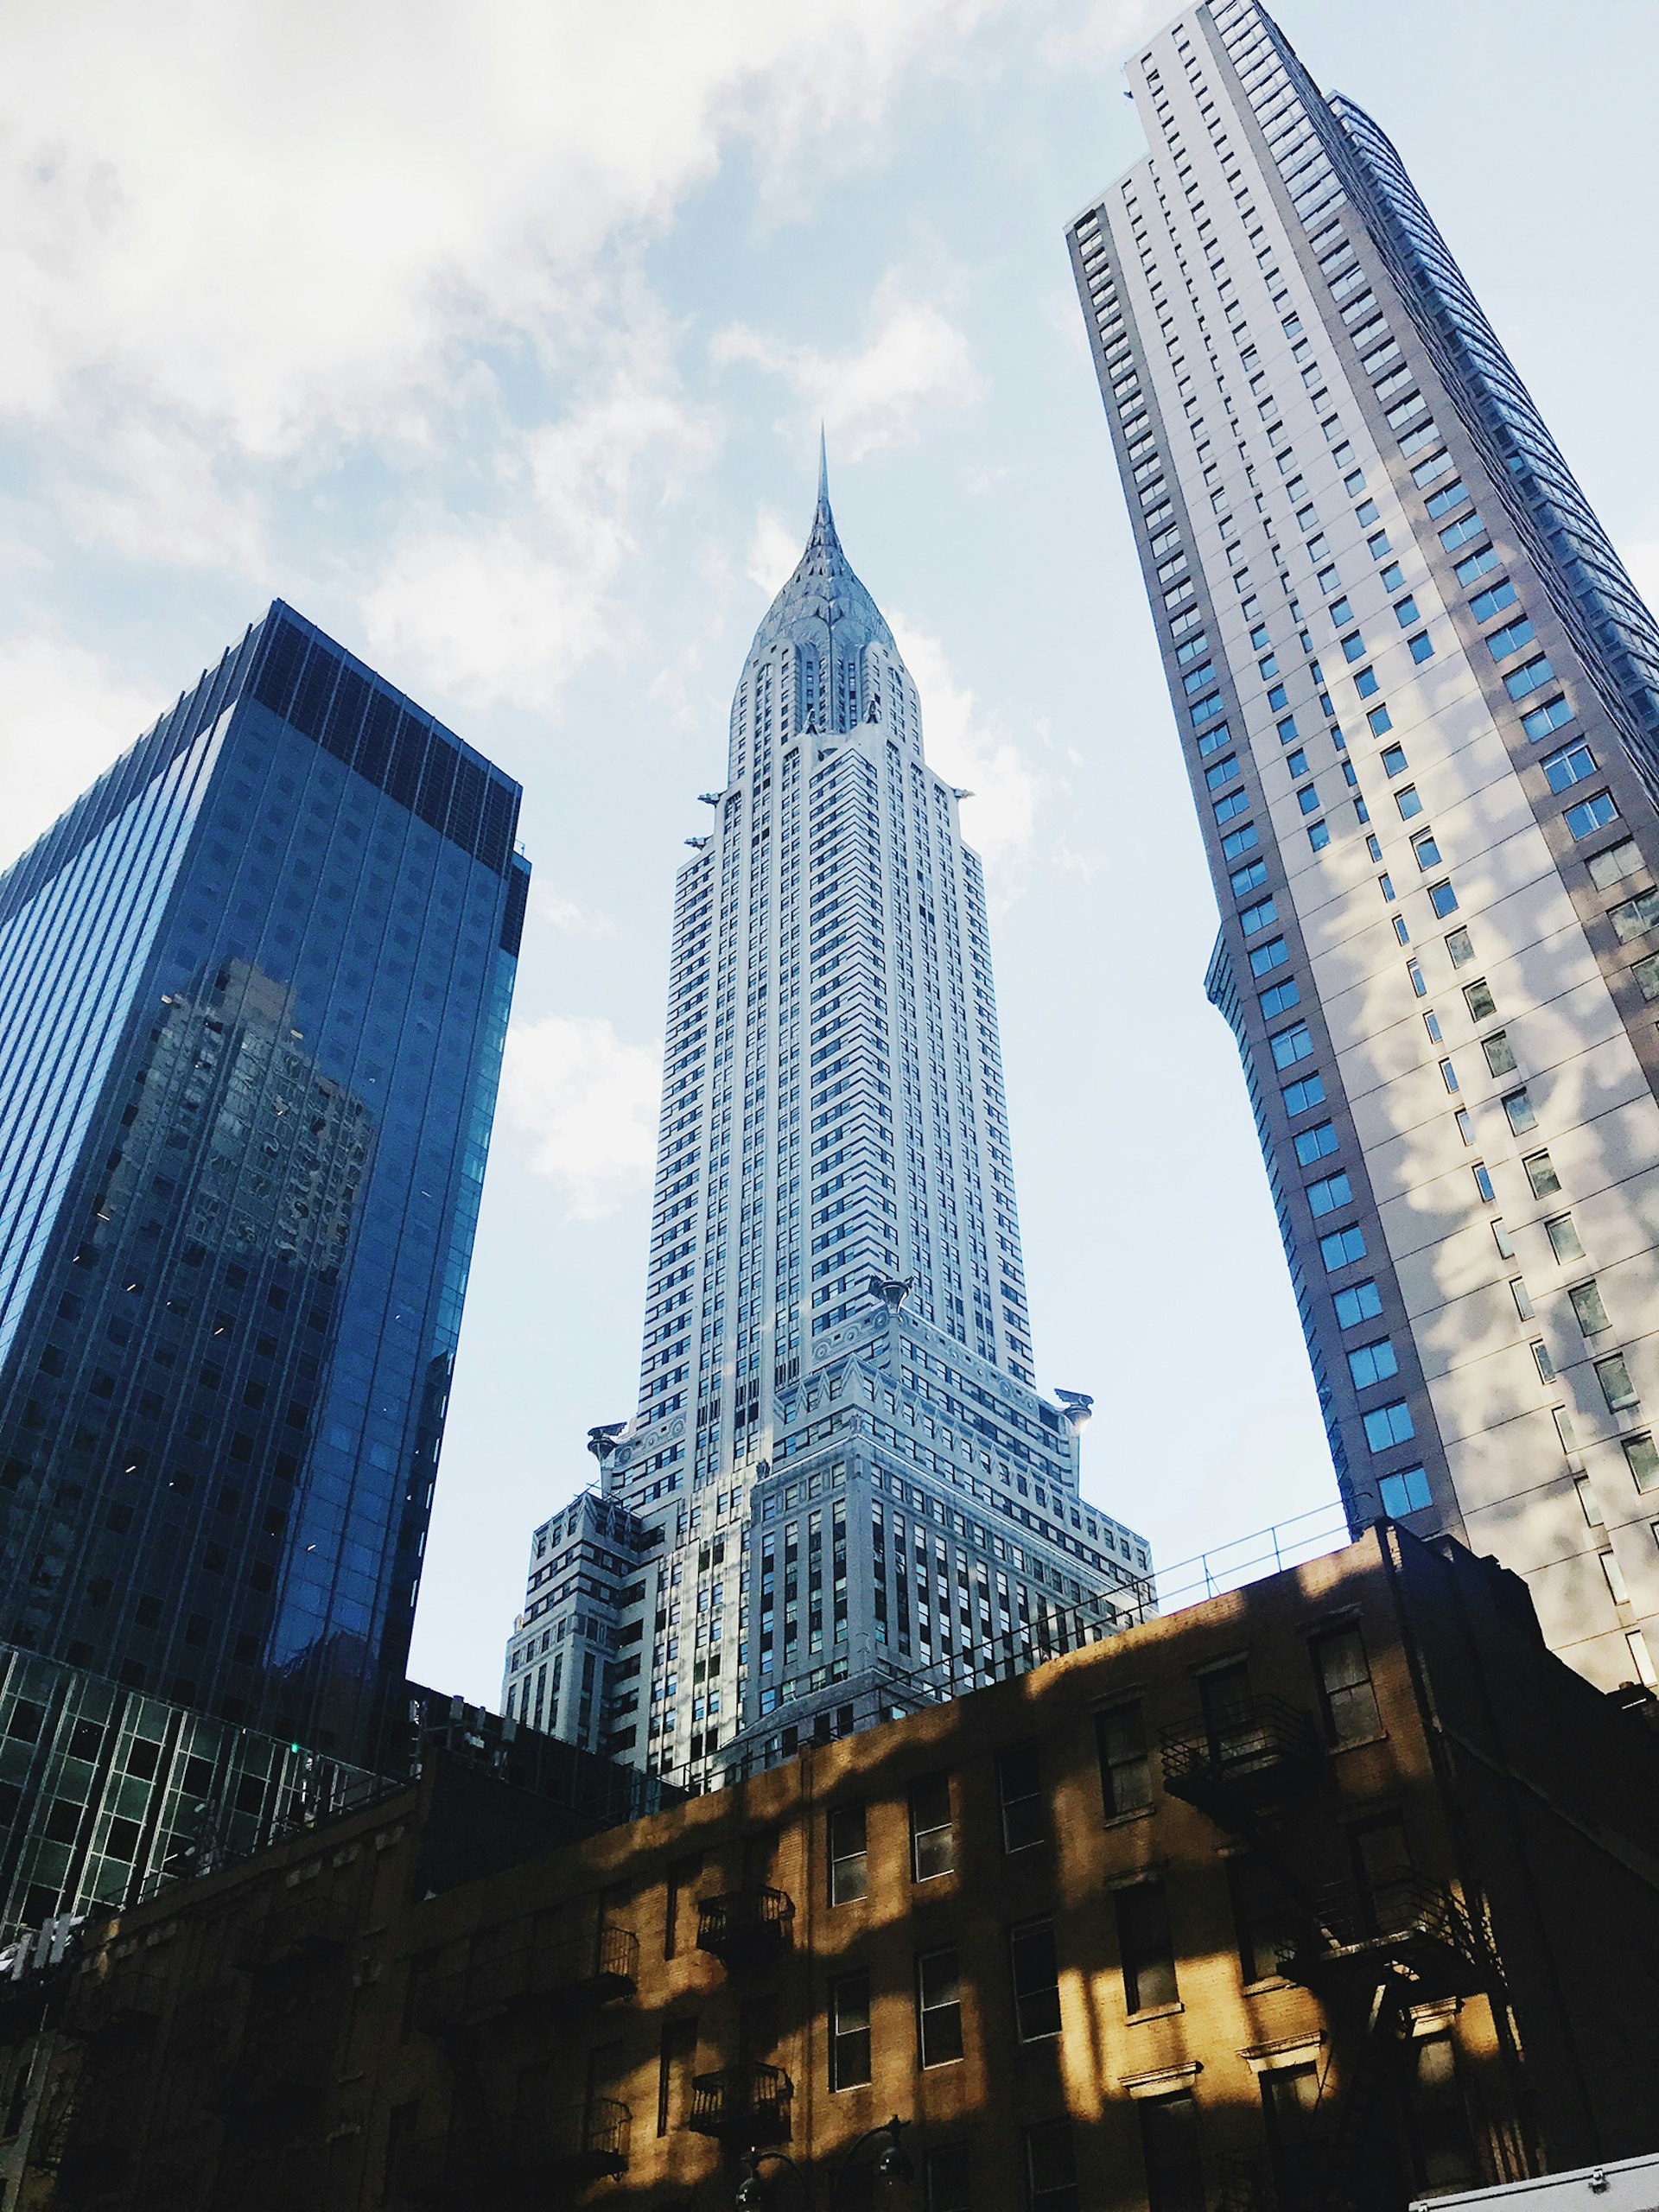 The Chrysler building and a city street in New York City